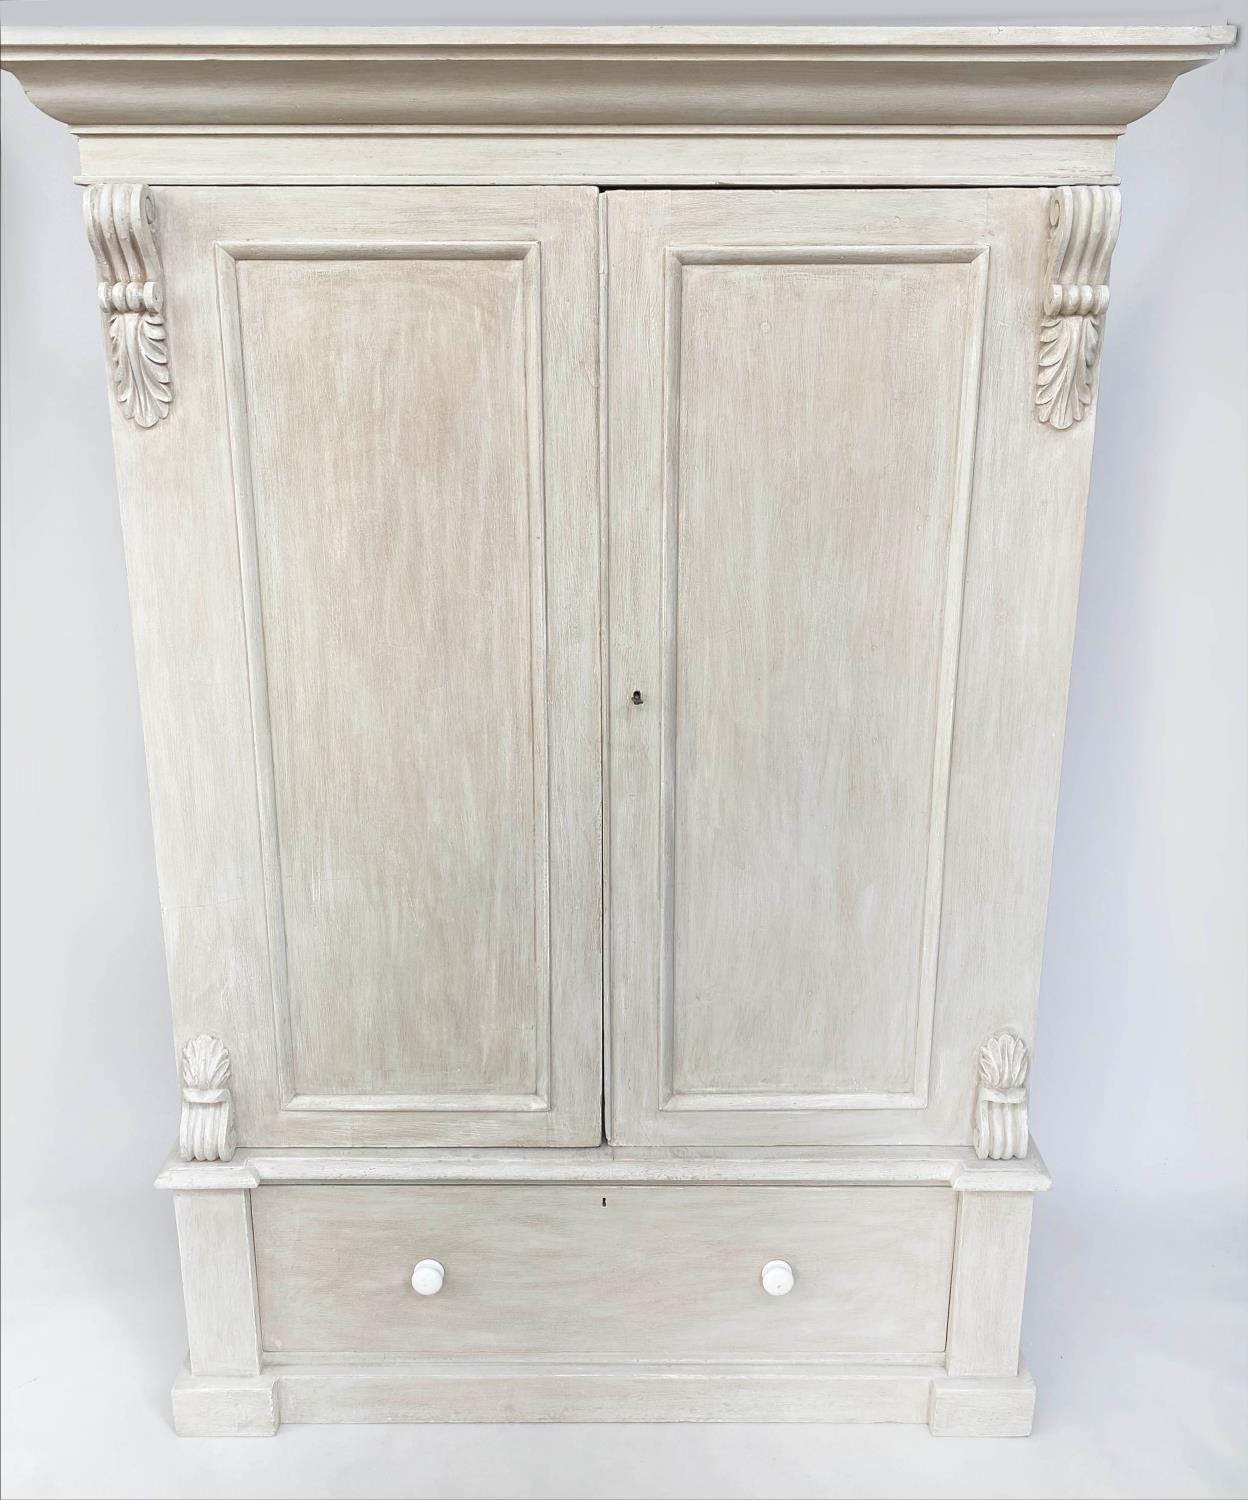 WARDROBE, 19th century, traditionally grey painted, with two doors enclosing hanging space above a - Image 10 of 11